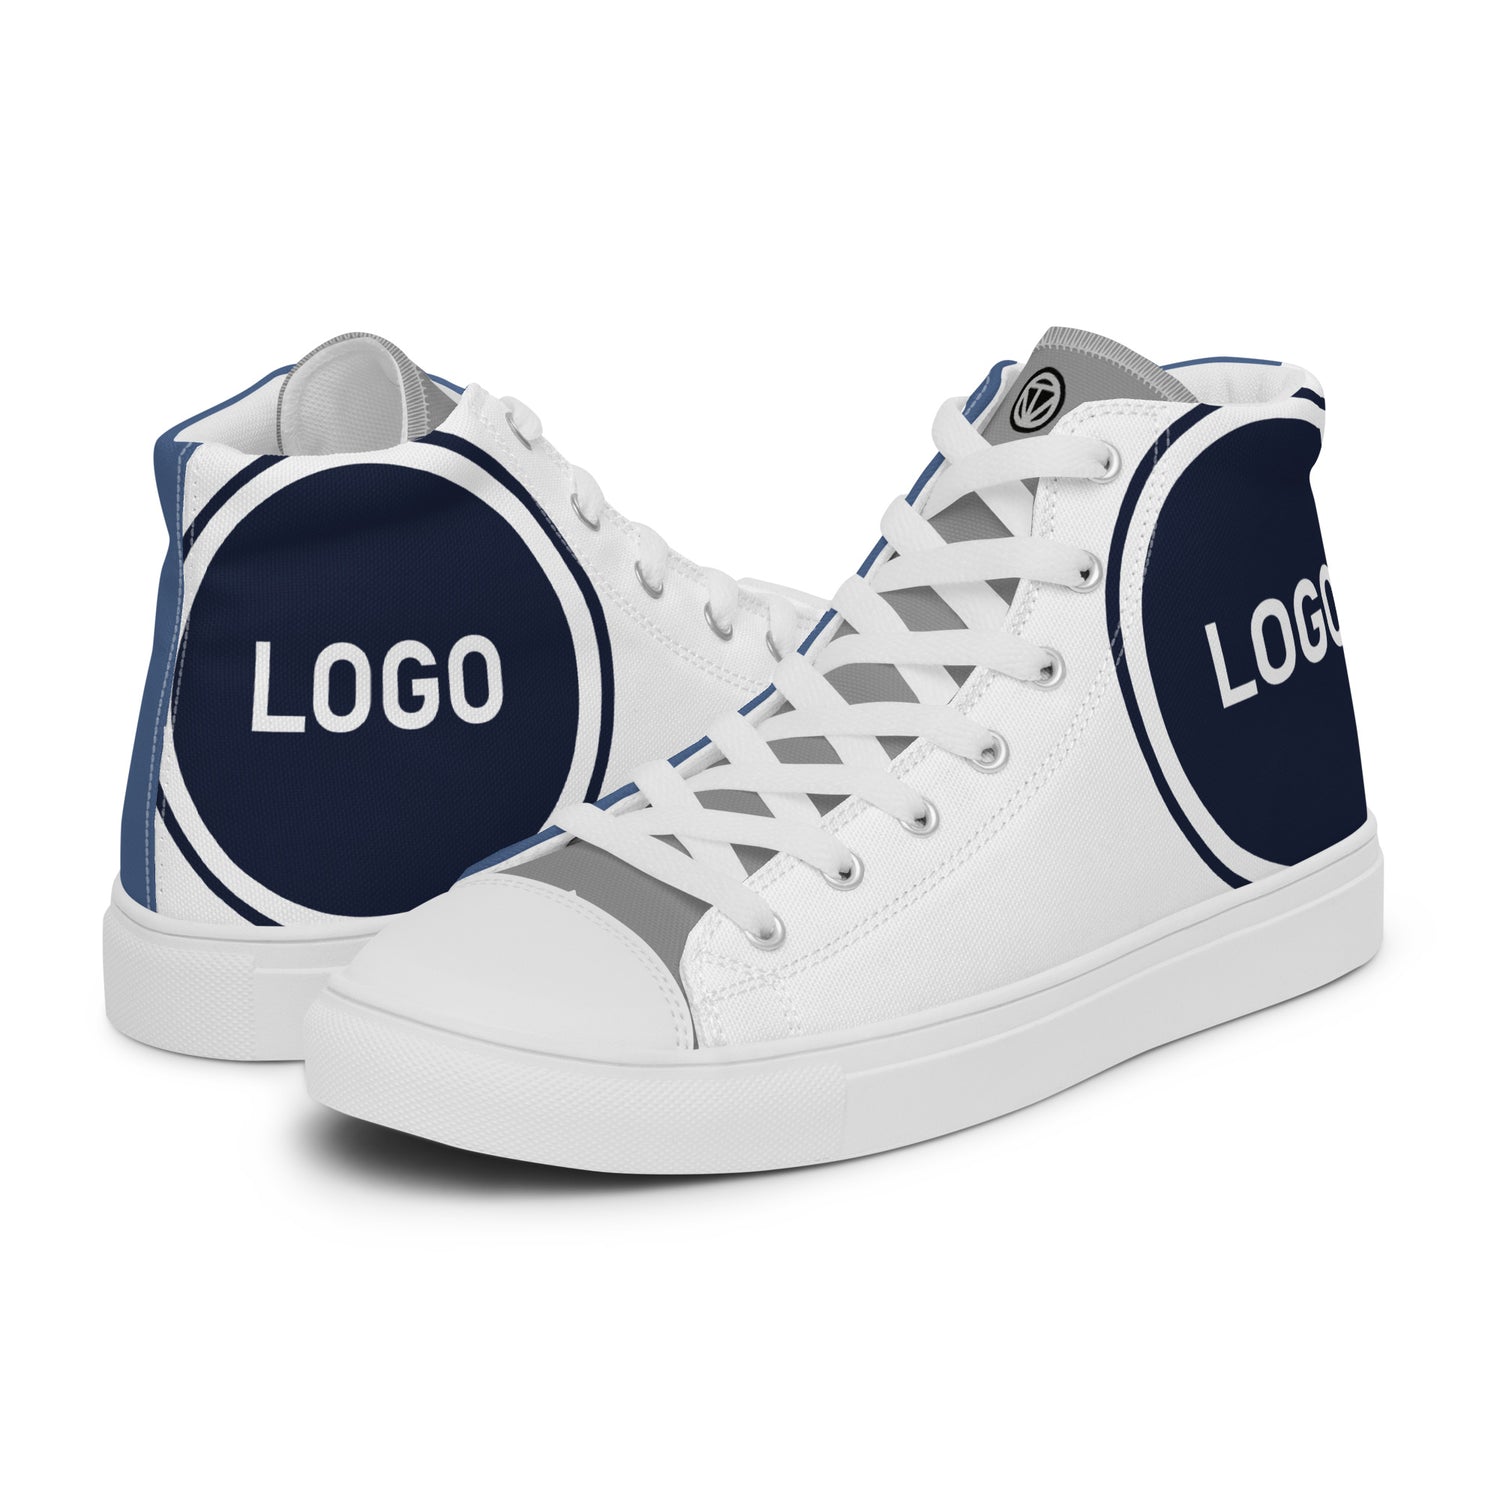 TIME OF VIBES TOV Damen High Sneaker CORPORATE - €129,00